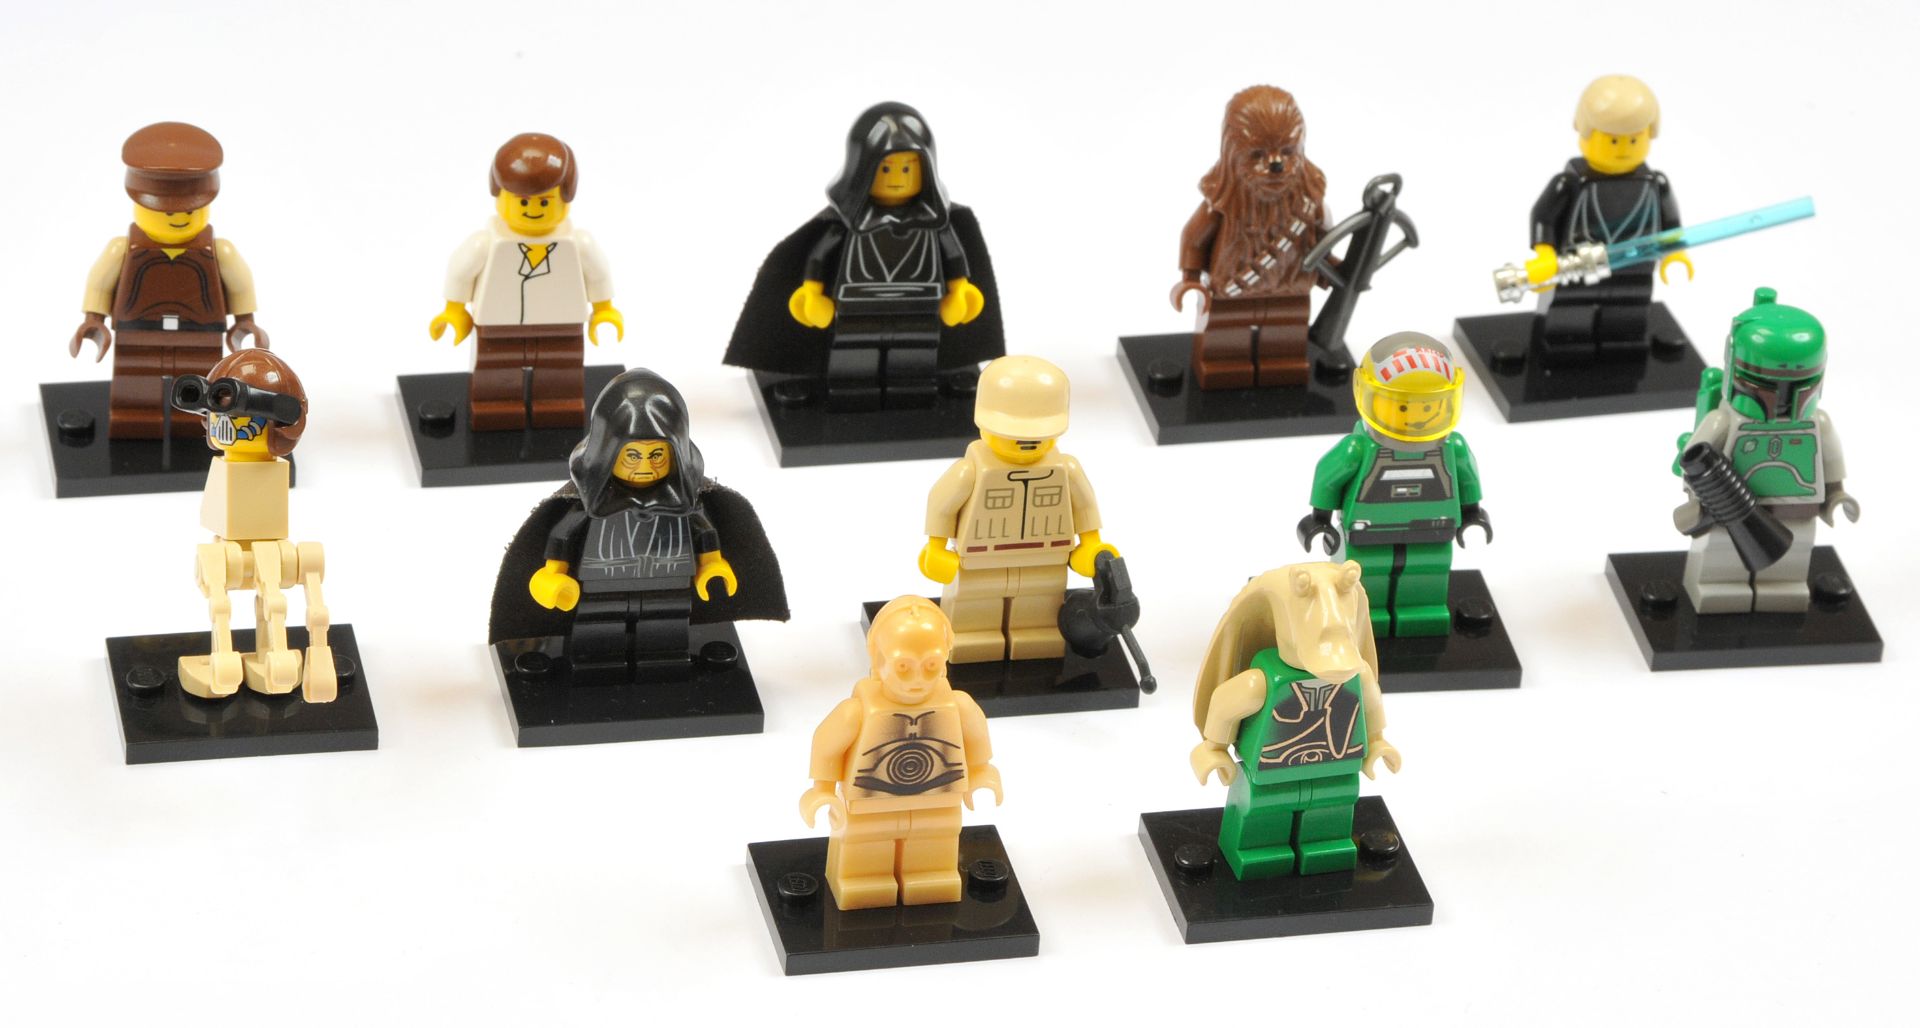 Lego Star Wars Minifigures 2000 Issues including Boba Fett, Chewbacca, Han Solo, plus others, Nea...